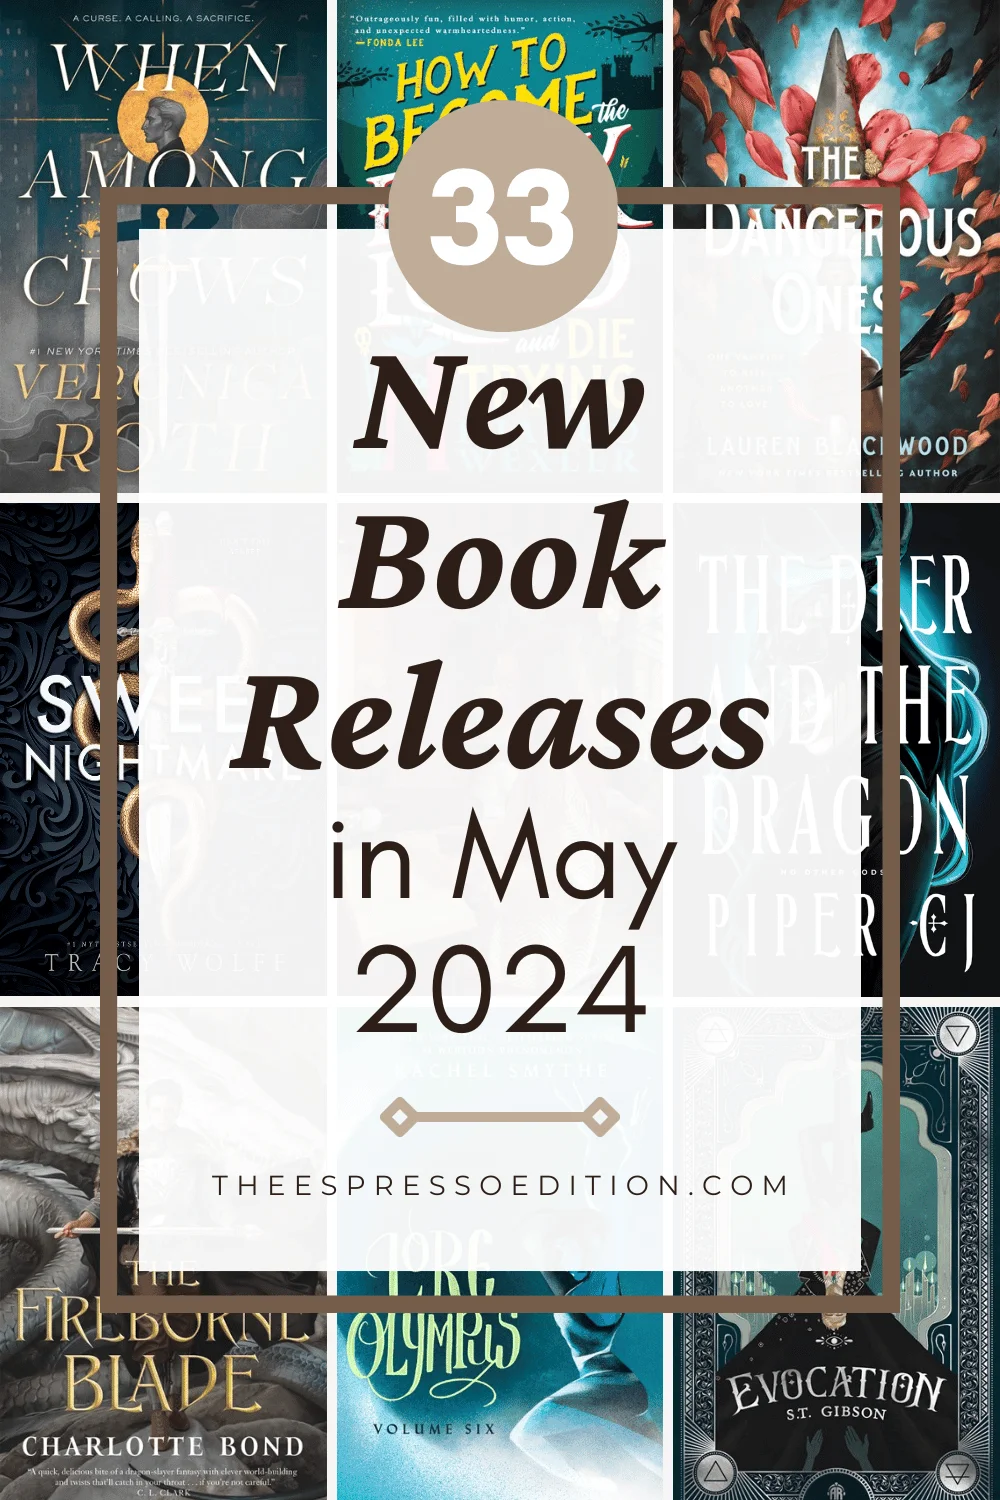 33 New Book Releases in May 2024 by The Espresso Edition cozy bookish blog